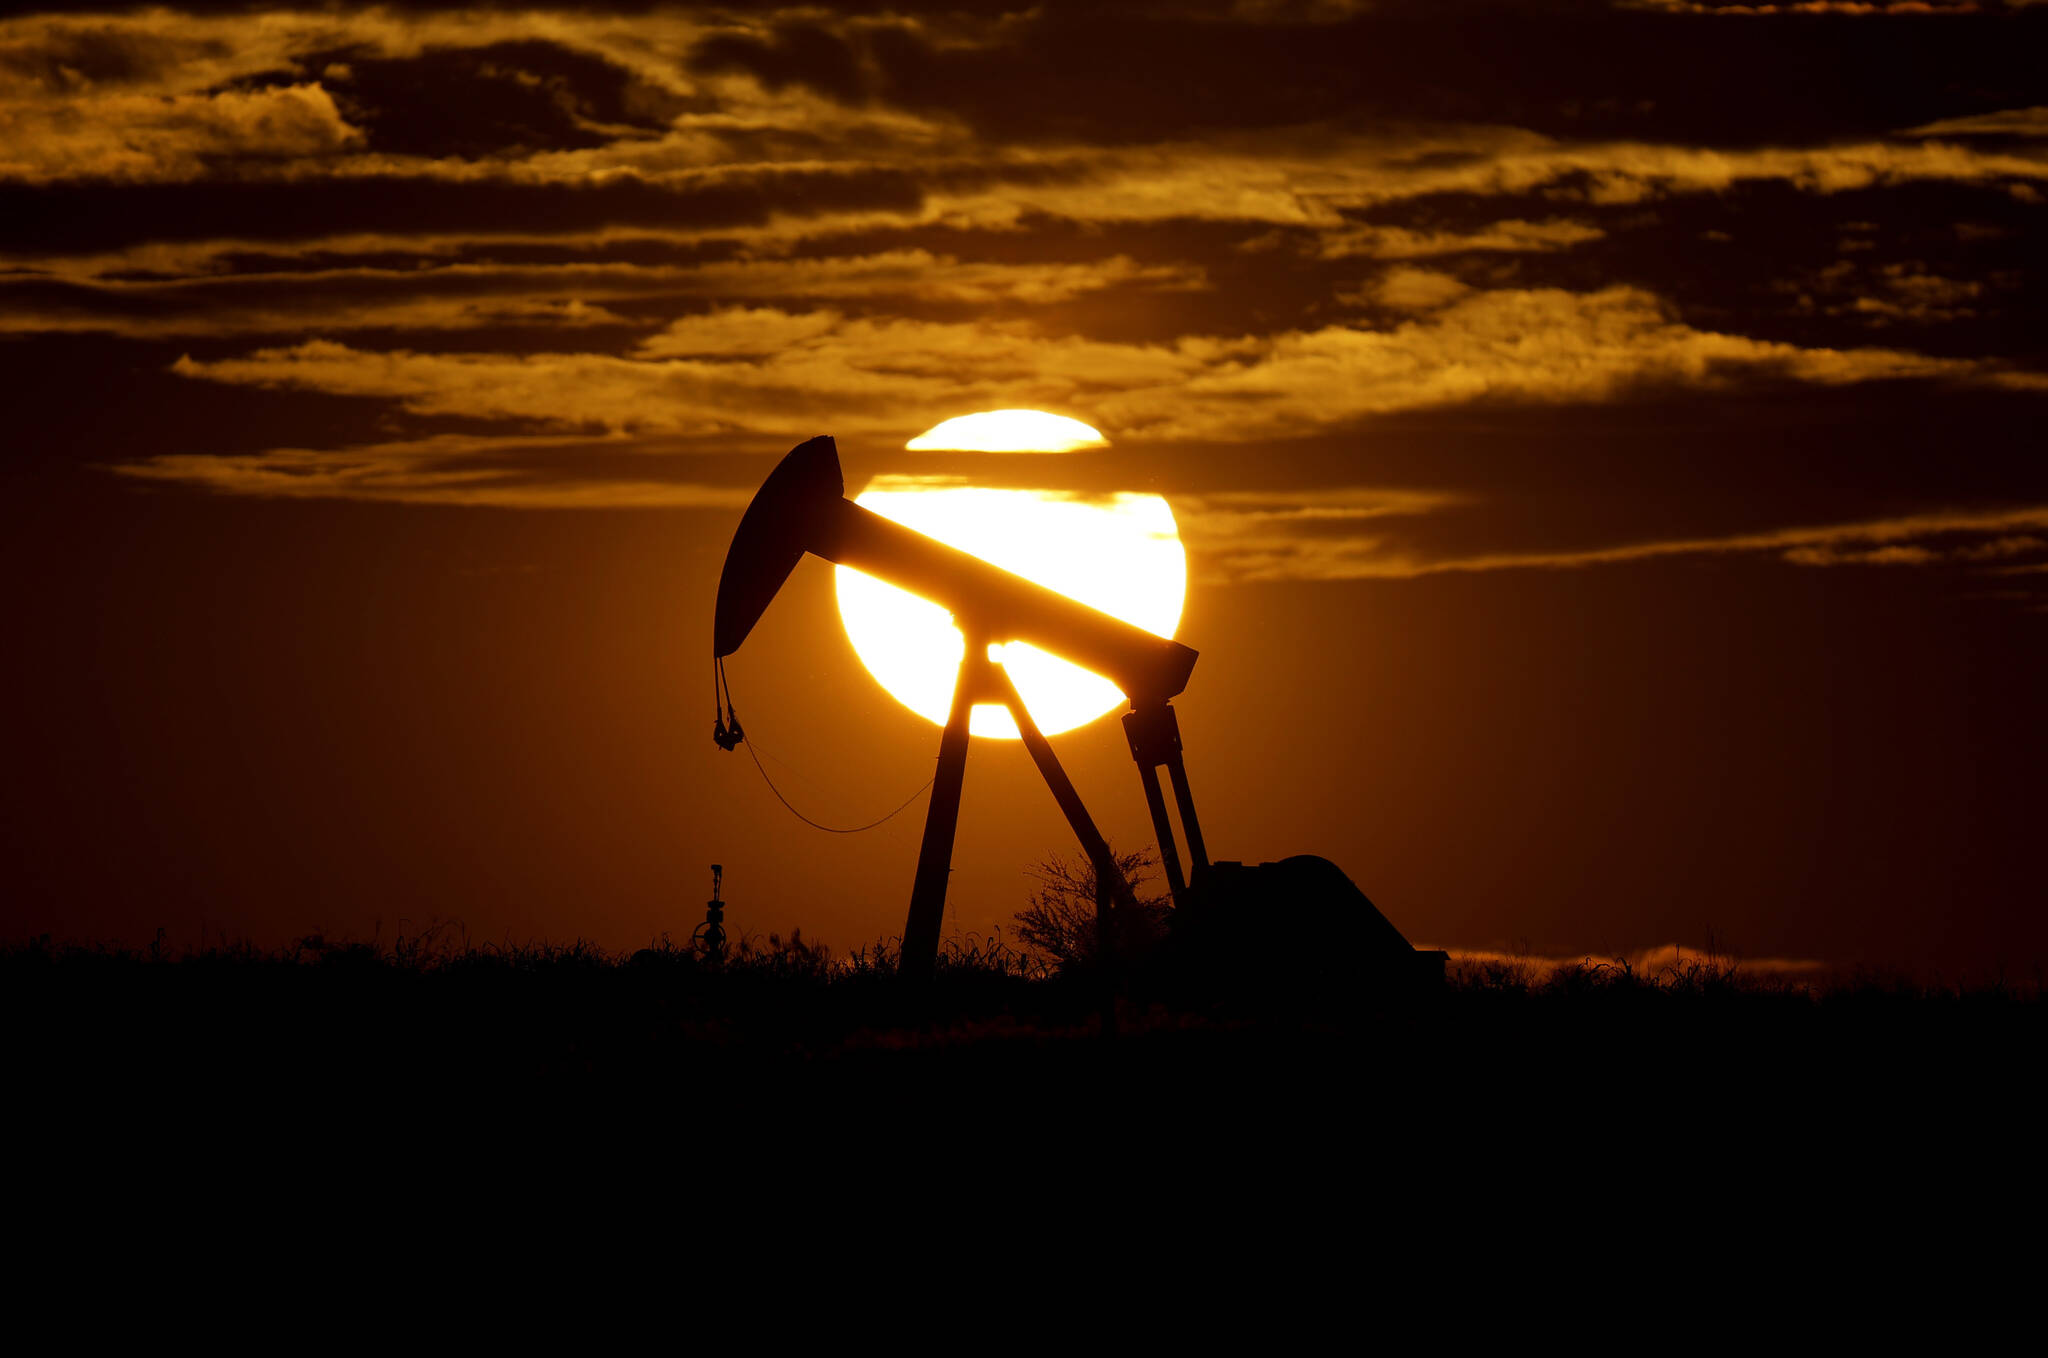 The sun sets behind an idle pump jack near Karnes City, USA, April 8, 2020. Oil prices are sagging amid fears of recessions across the globe. OPEC and allied countries are weighing what to do about that when they meet online Thursday, Sept. 8, 2022. High oil prices were a bonanza for countries like Saudi Arabia over the summer, but now they're well off those highs. Saudi Arabia's oil minister has even said the group known as OPEC+ could cut production at any time. (AP Photo / Eric Gay)